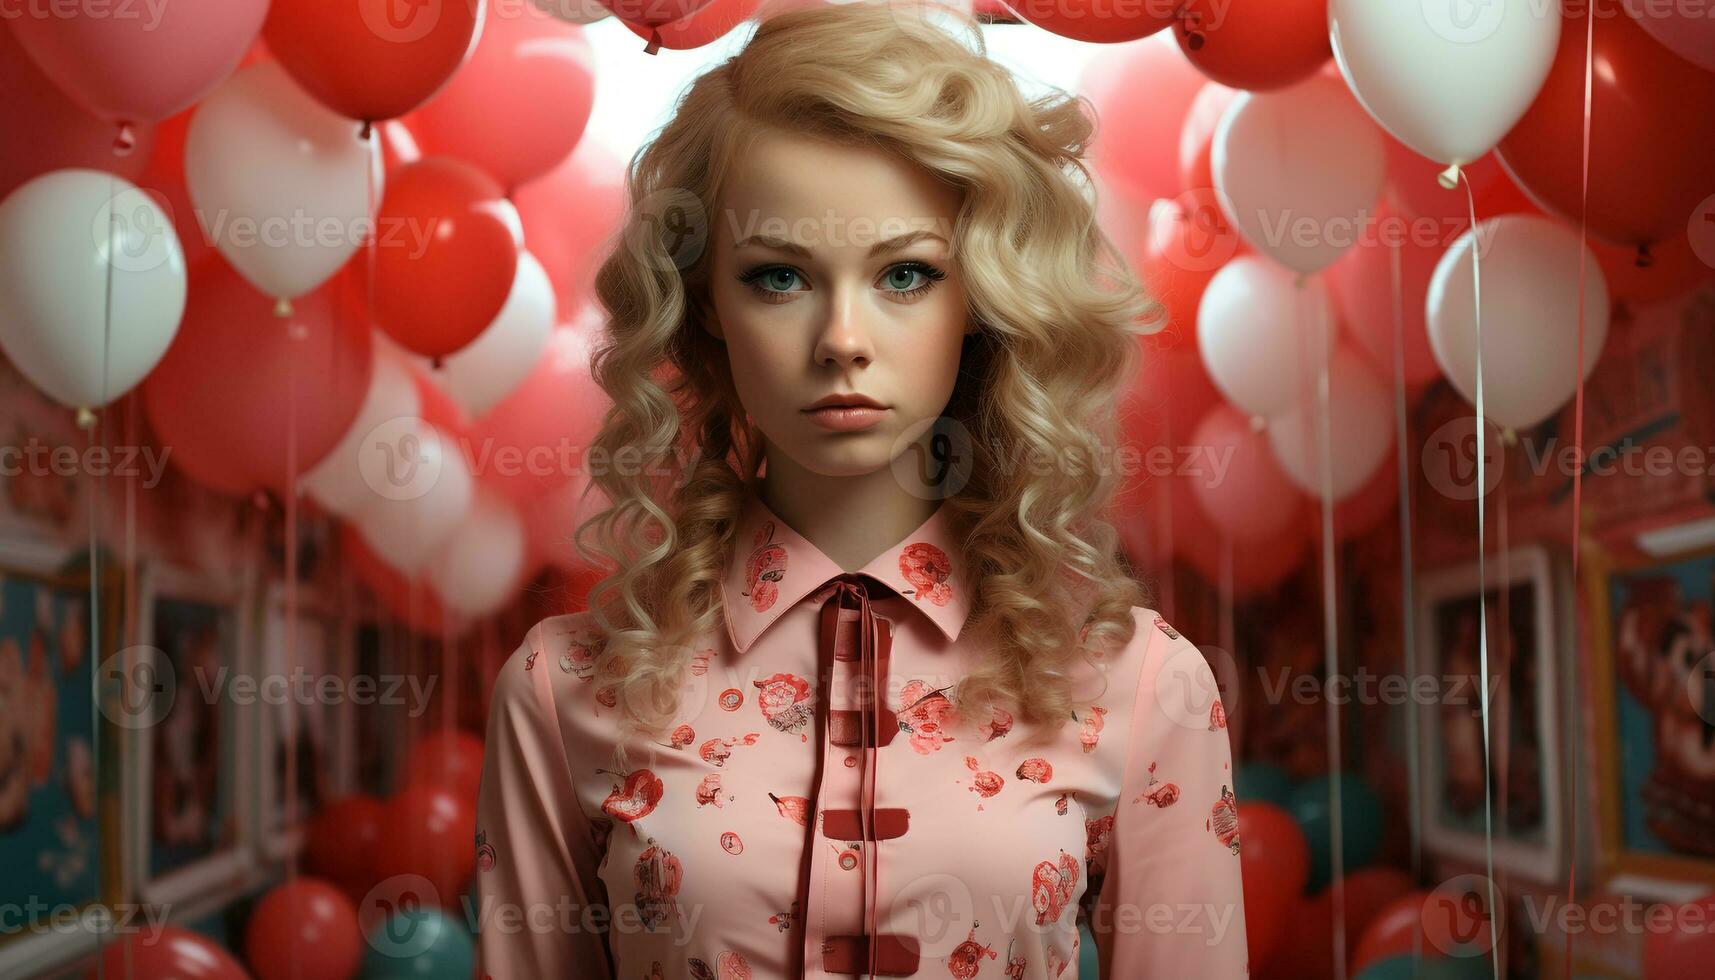 A beautiful blond woman smiling, holding a colorful balloon generated by AI photo